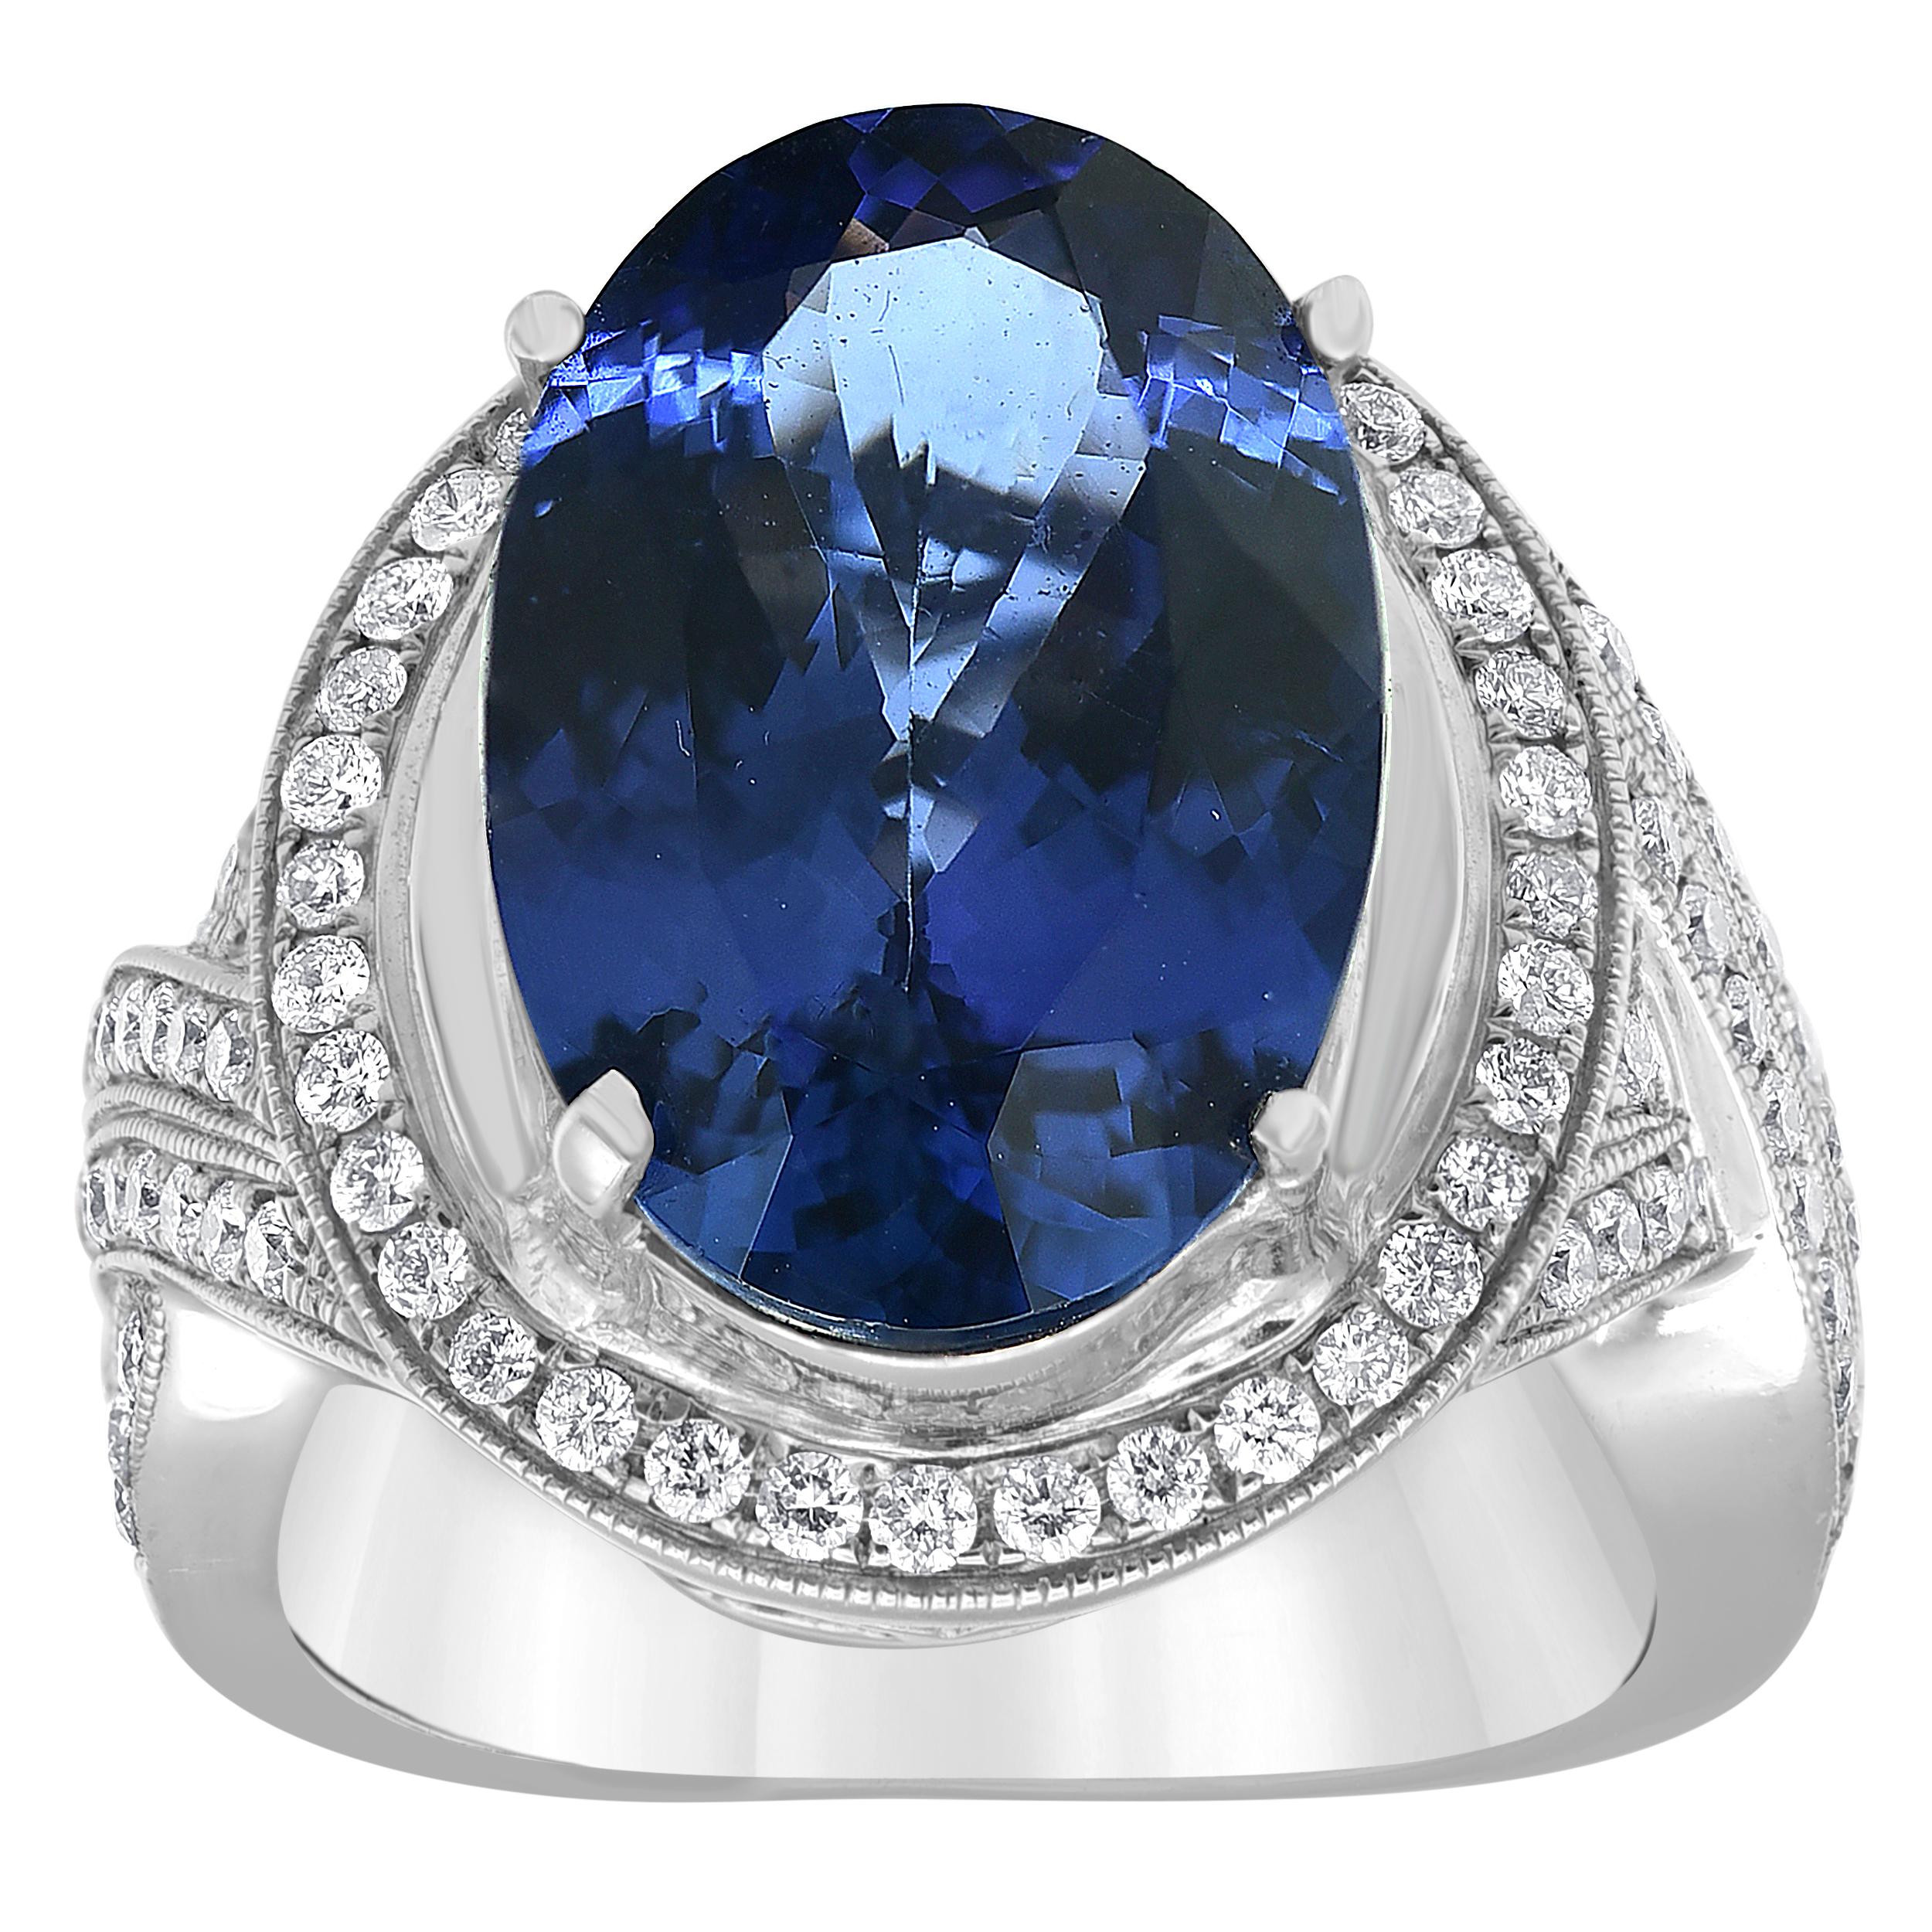 A vision of vivid colour, this tanzanite and diamond halo ring features a vibrant Blue oval tanzanite gemstone framed by a halo of prong set round brilliant diamonds set in polished 14k White gold.